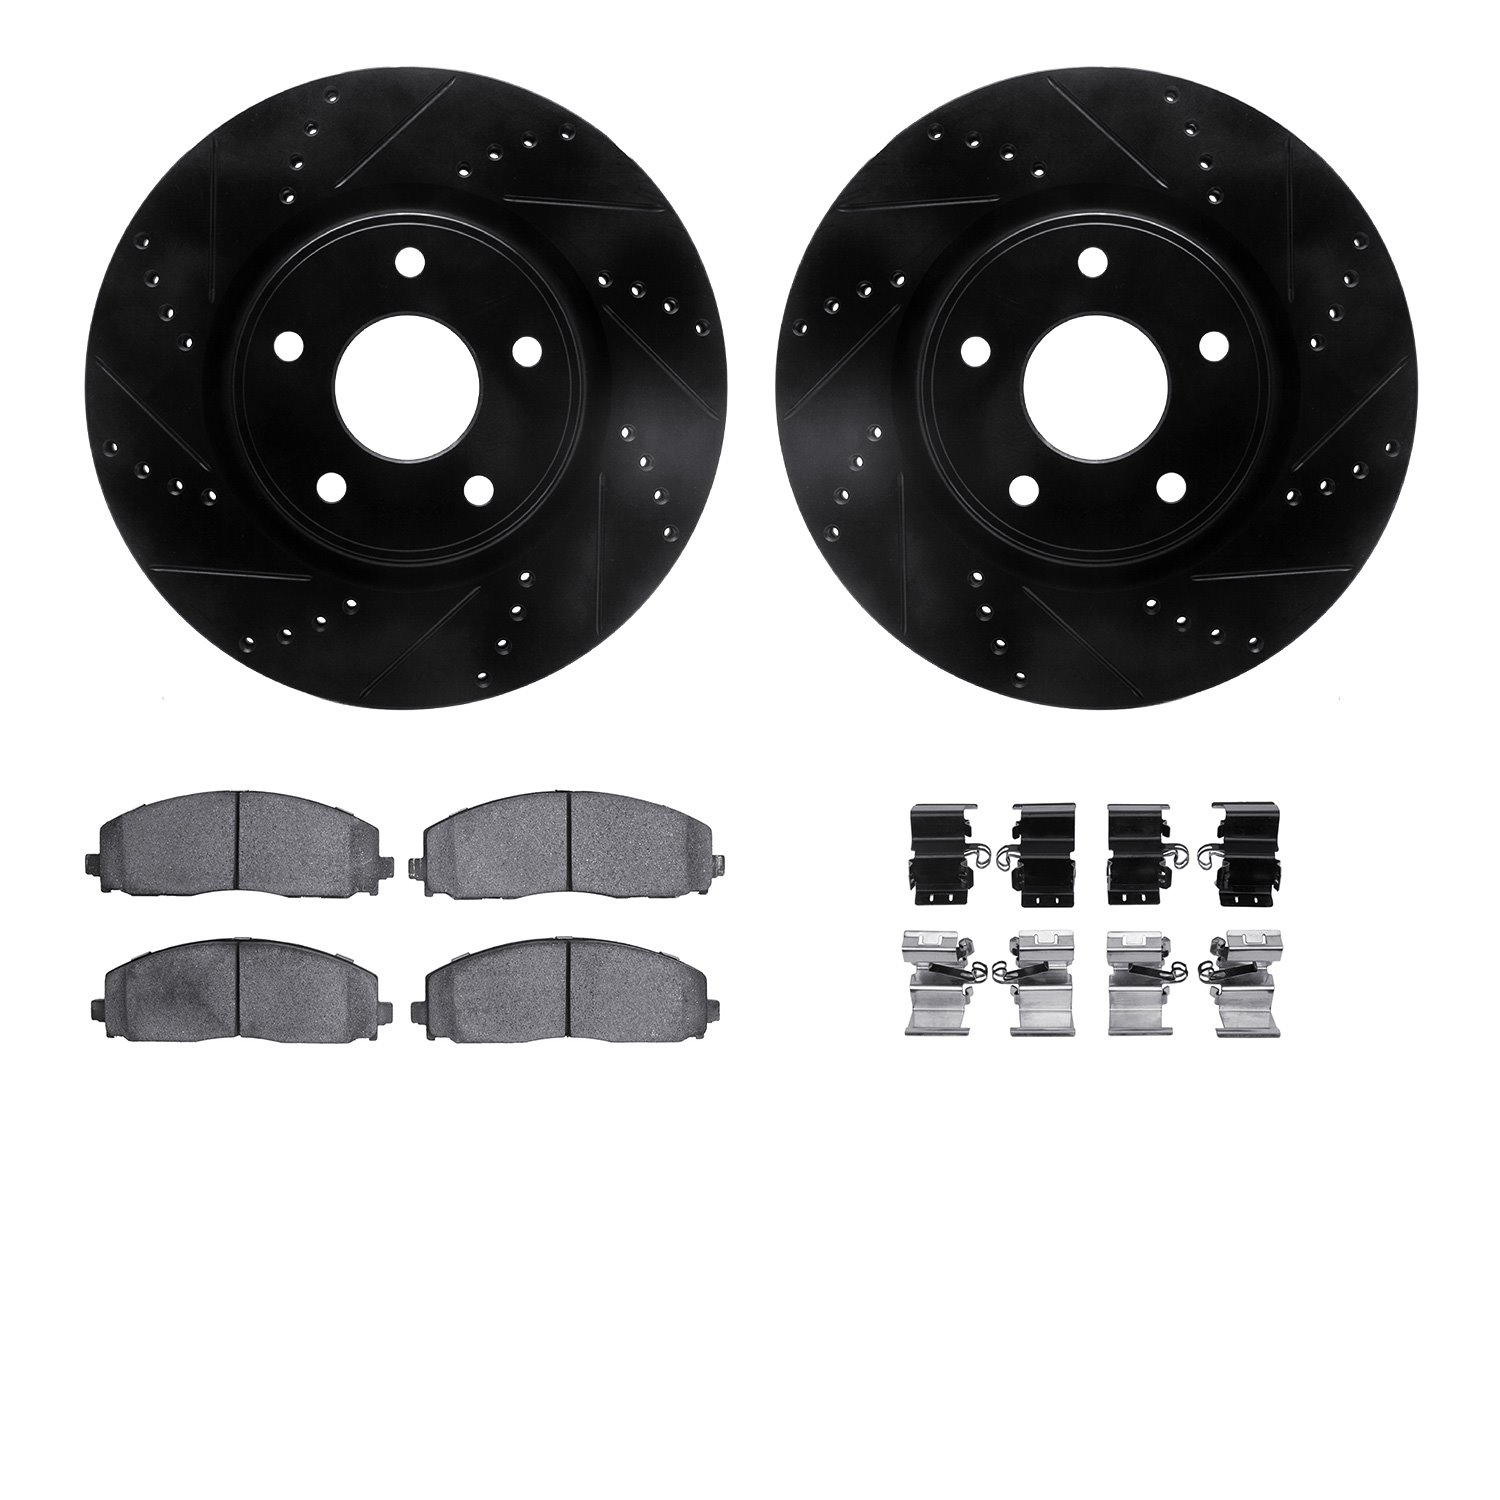 8412-40022 Drilled/Slotted Brake Rotors with Ultimate-Duty Brake Pads Kit & Hardware [Black], Fits Select Multiple Makes/Models,